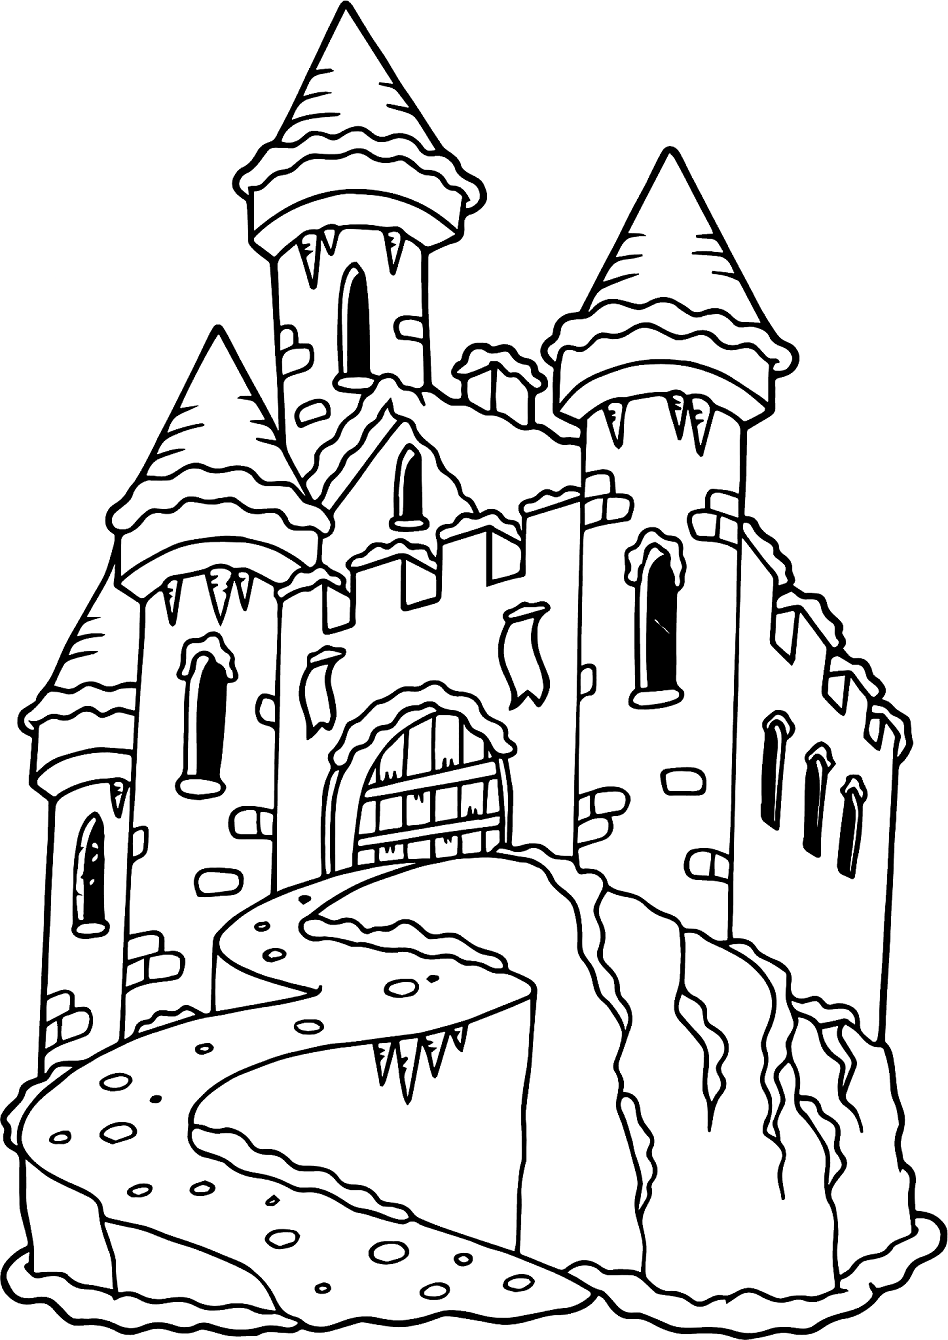 Printable Castle Free from Castle